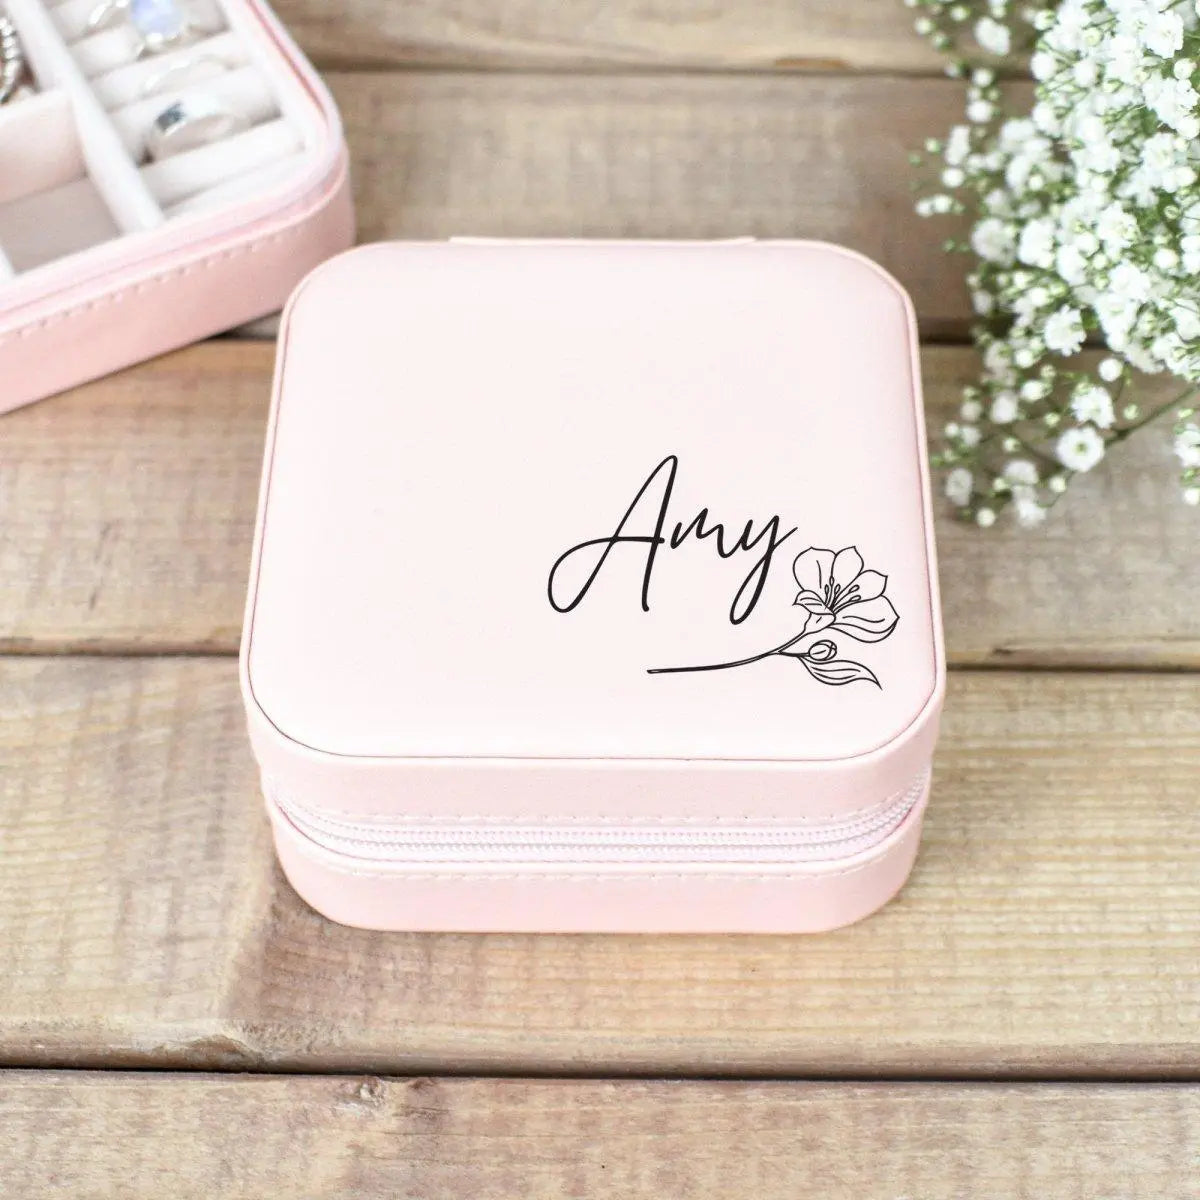 Personalised Travel Jewellery Case, Mini Jewellery Box, Mothers Day Gift, Bridesmaid Gift, Jewellery Storage, Beauty Organiser, Gift for Her - Amy Lucy